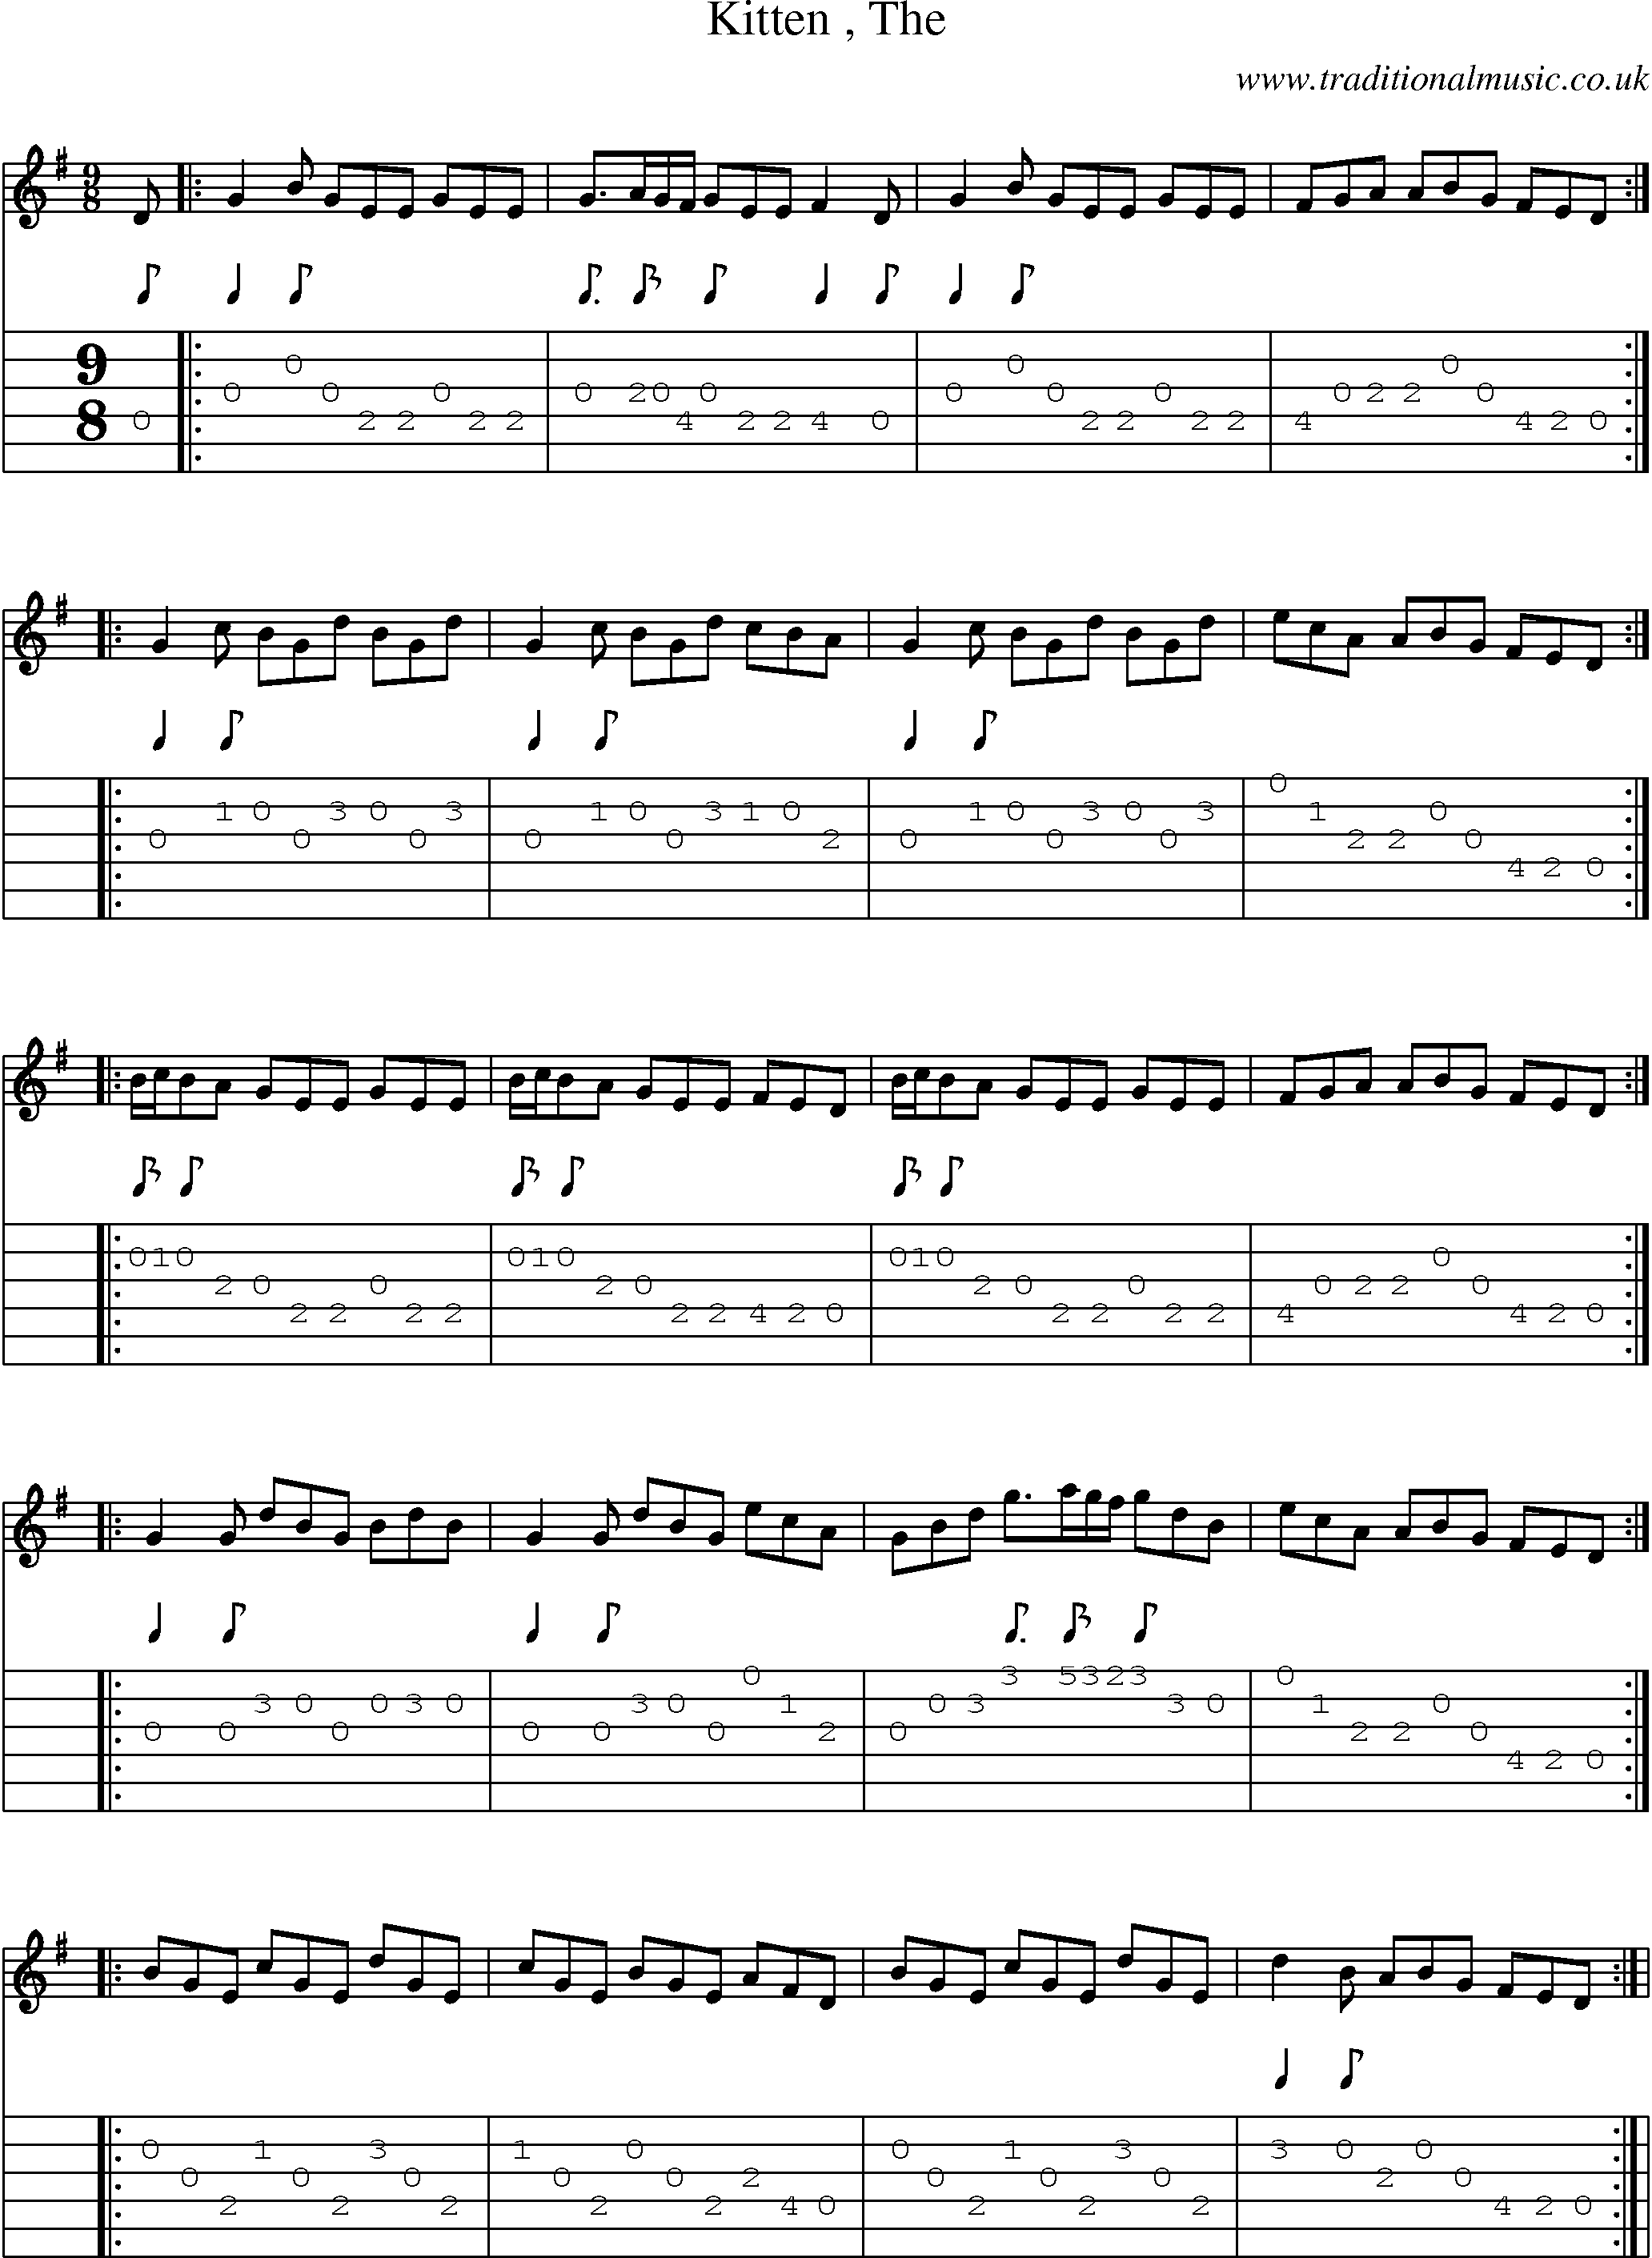 Music Score and Guitar Tabs for Kitten